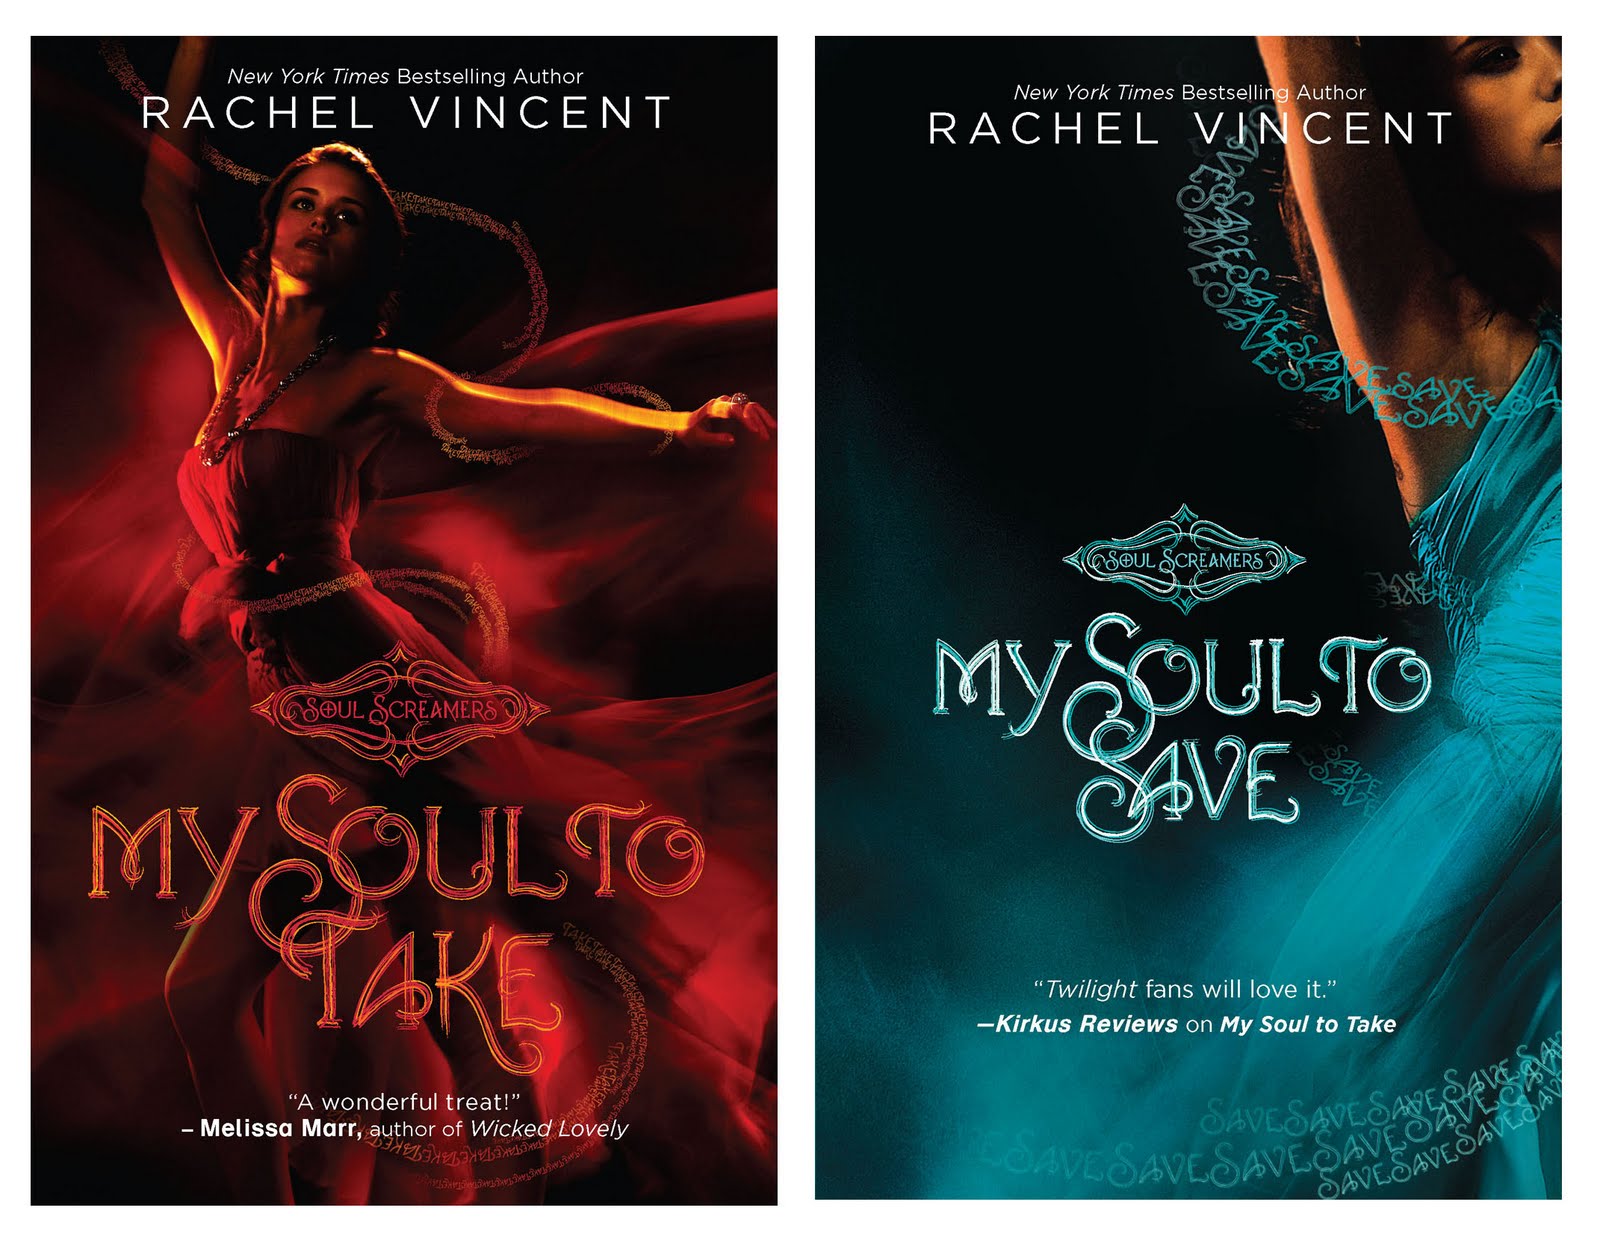 Contest: Soul Screamers Series! My Soul to Take/My Soul to Save